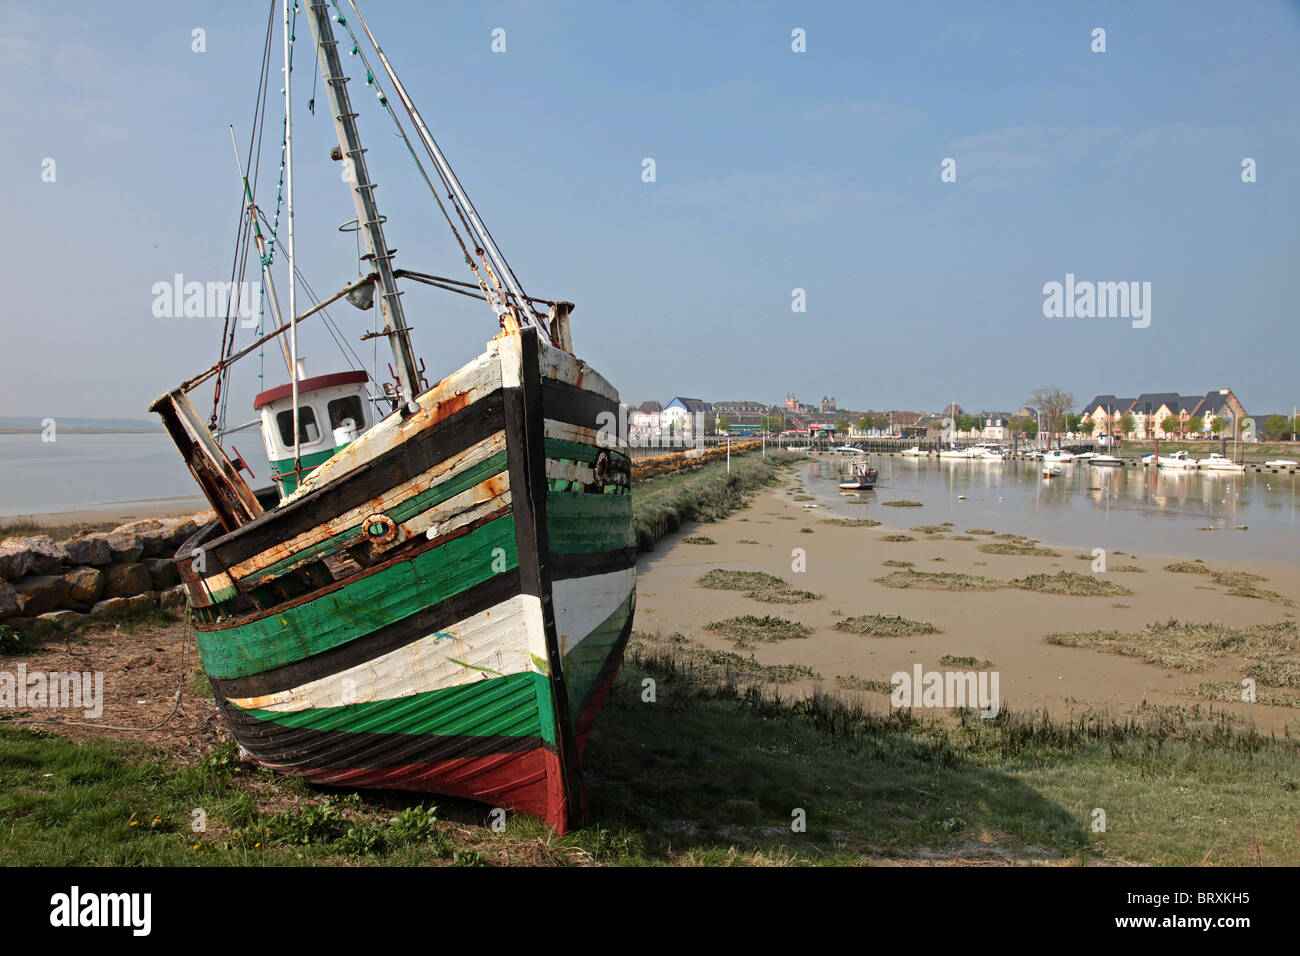 WRECK OF A BOAT WASHED UP ON THE SHORES, SIGN OF THE DROP IN FISHING ACTIVITY, LE CROTOY, BAY OF SOMME (80), FRANCE Stock Photo